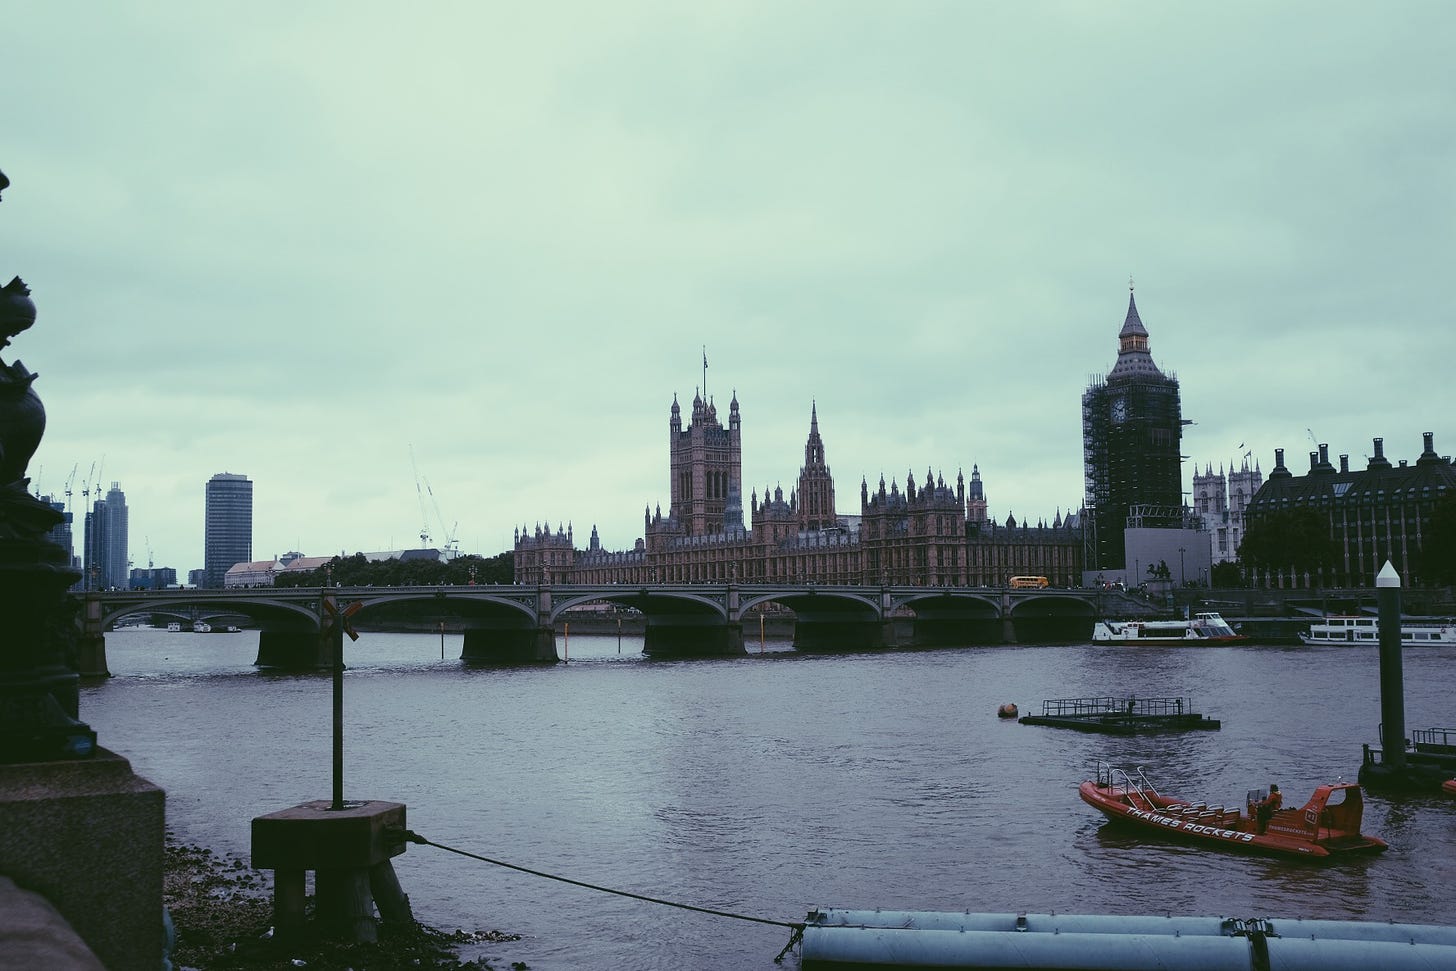 London's Houses of Parliament sit on the far side of the Thames. The day is dark and grey and the 35mm photograph is grainy and underexposed, the scene captured at a slightly haphazard angle